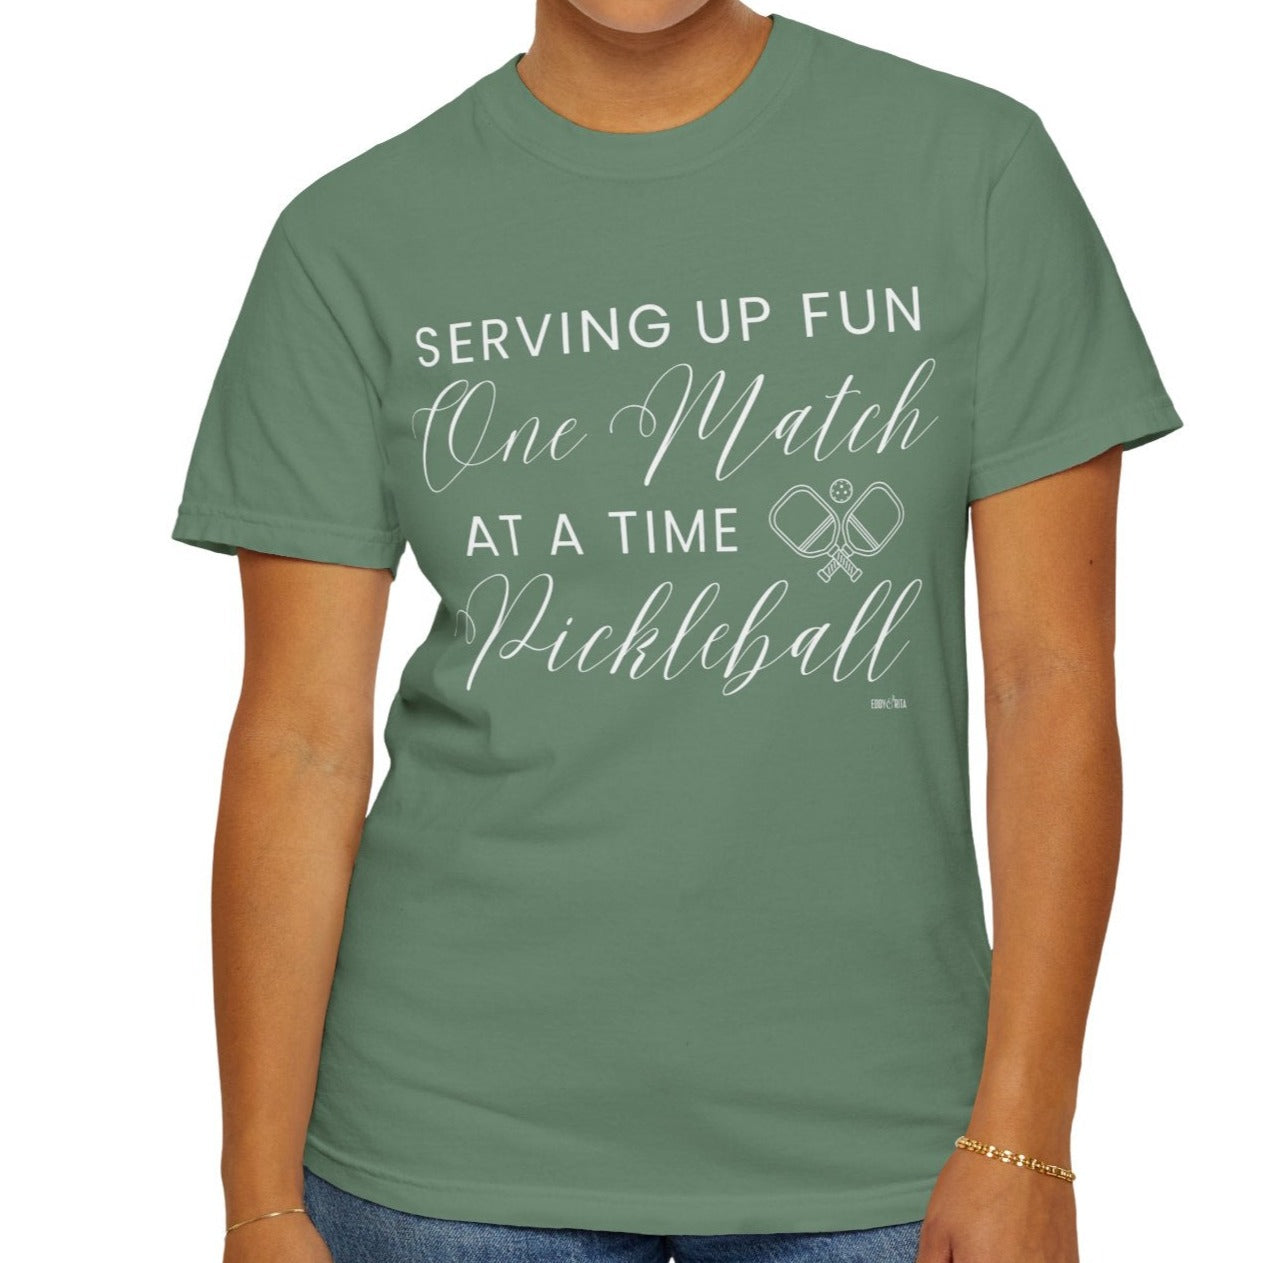 Eddy and Rita Women's Comfort Colors T-Shirt - "Serving Up Fun One Match at a Time Pickleball" Colorful Graphic Tee for Pickleball Enthusiasts